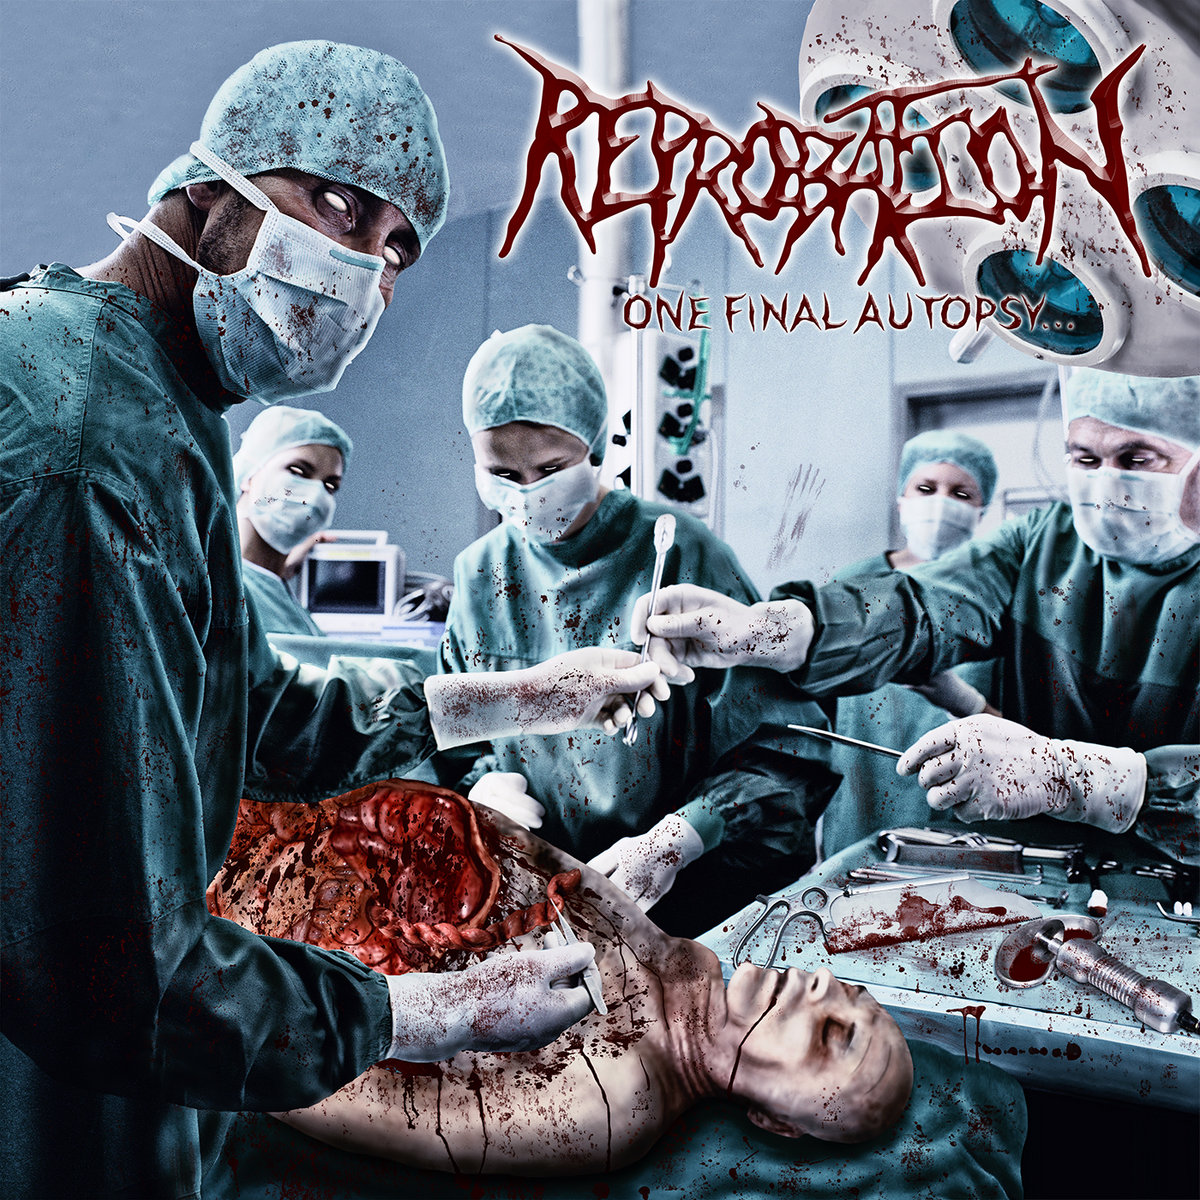 Reprobation 2016 - One Final Autopsy​.​.​.